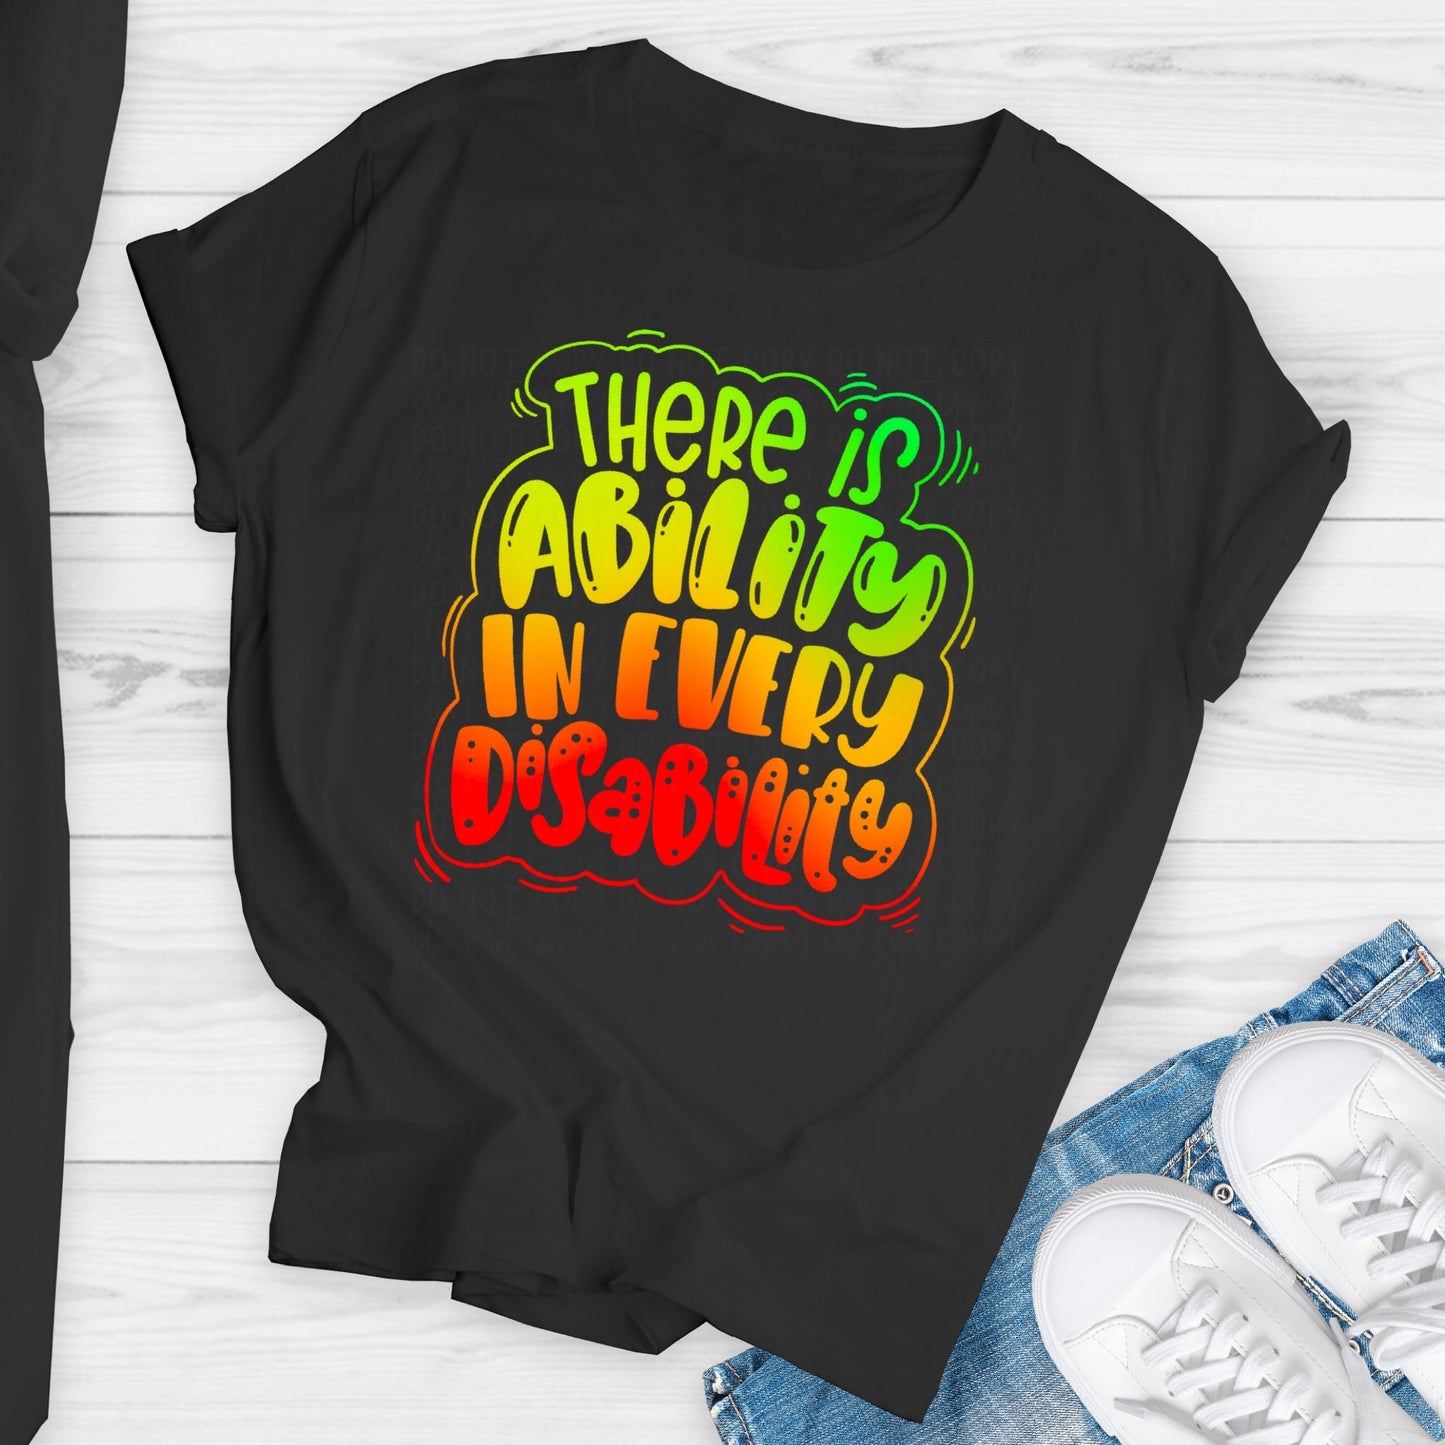 There Is Ability In Every Disability Black Tee (Youth/Toddler/Infant)